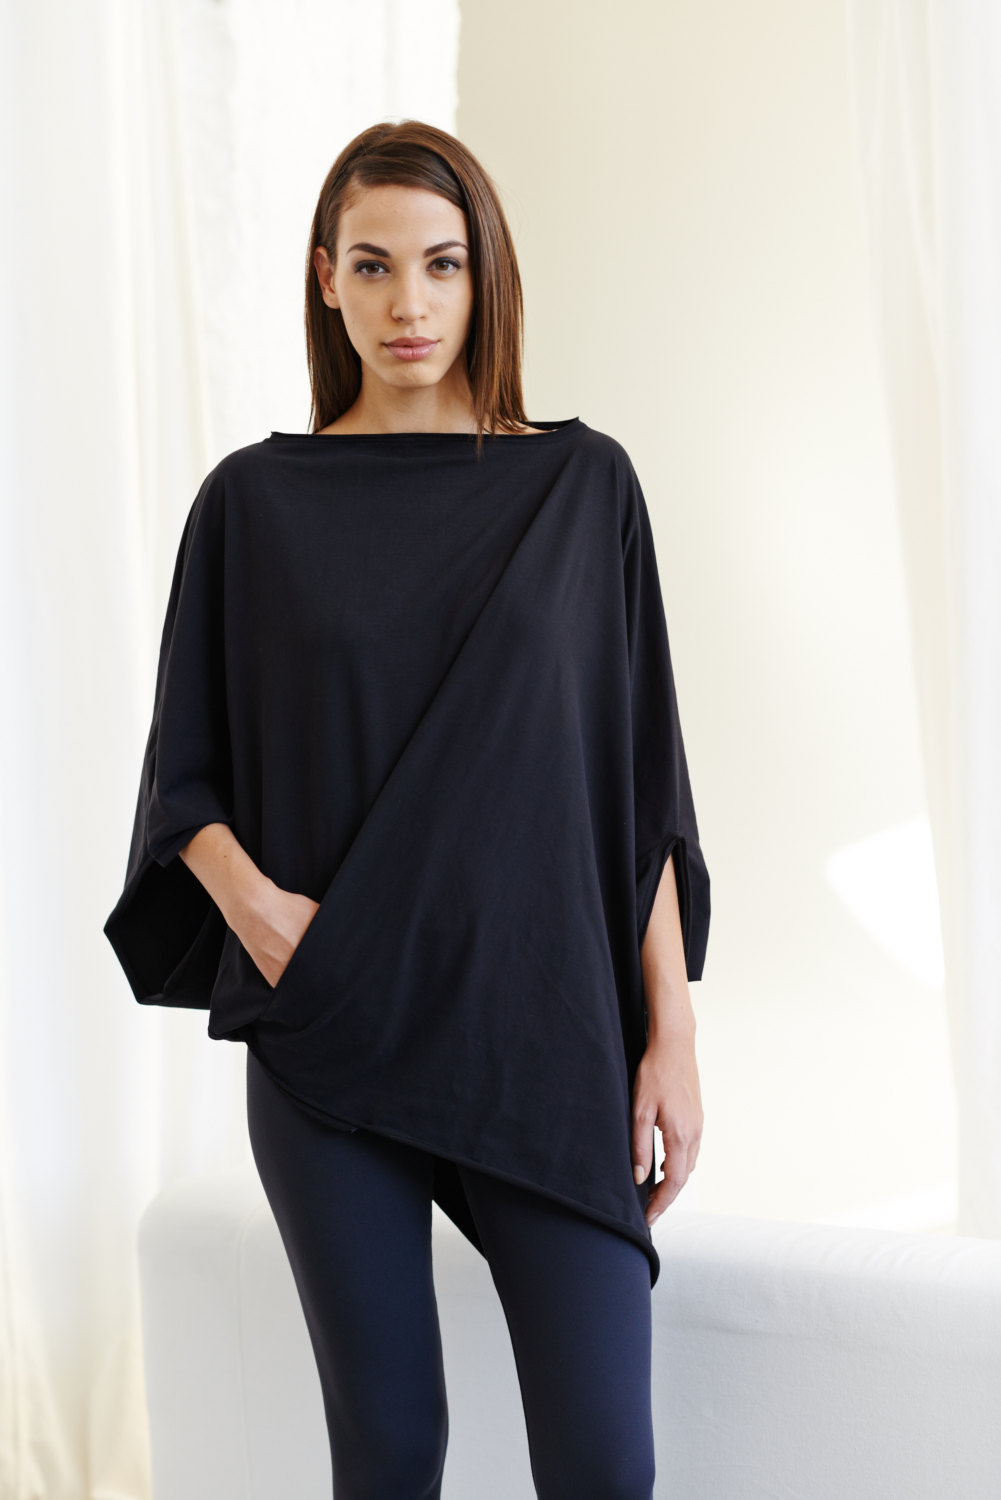 Twisted Black Top/ Oversized Asymmetrical Top/ Loose Black Top/ Casual Cotton Blouse By Arya Sense